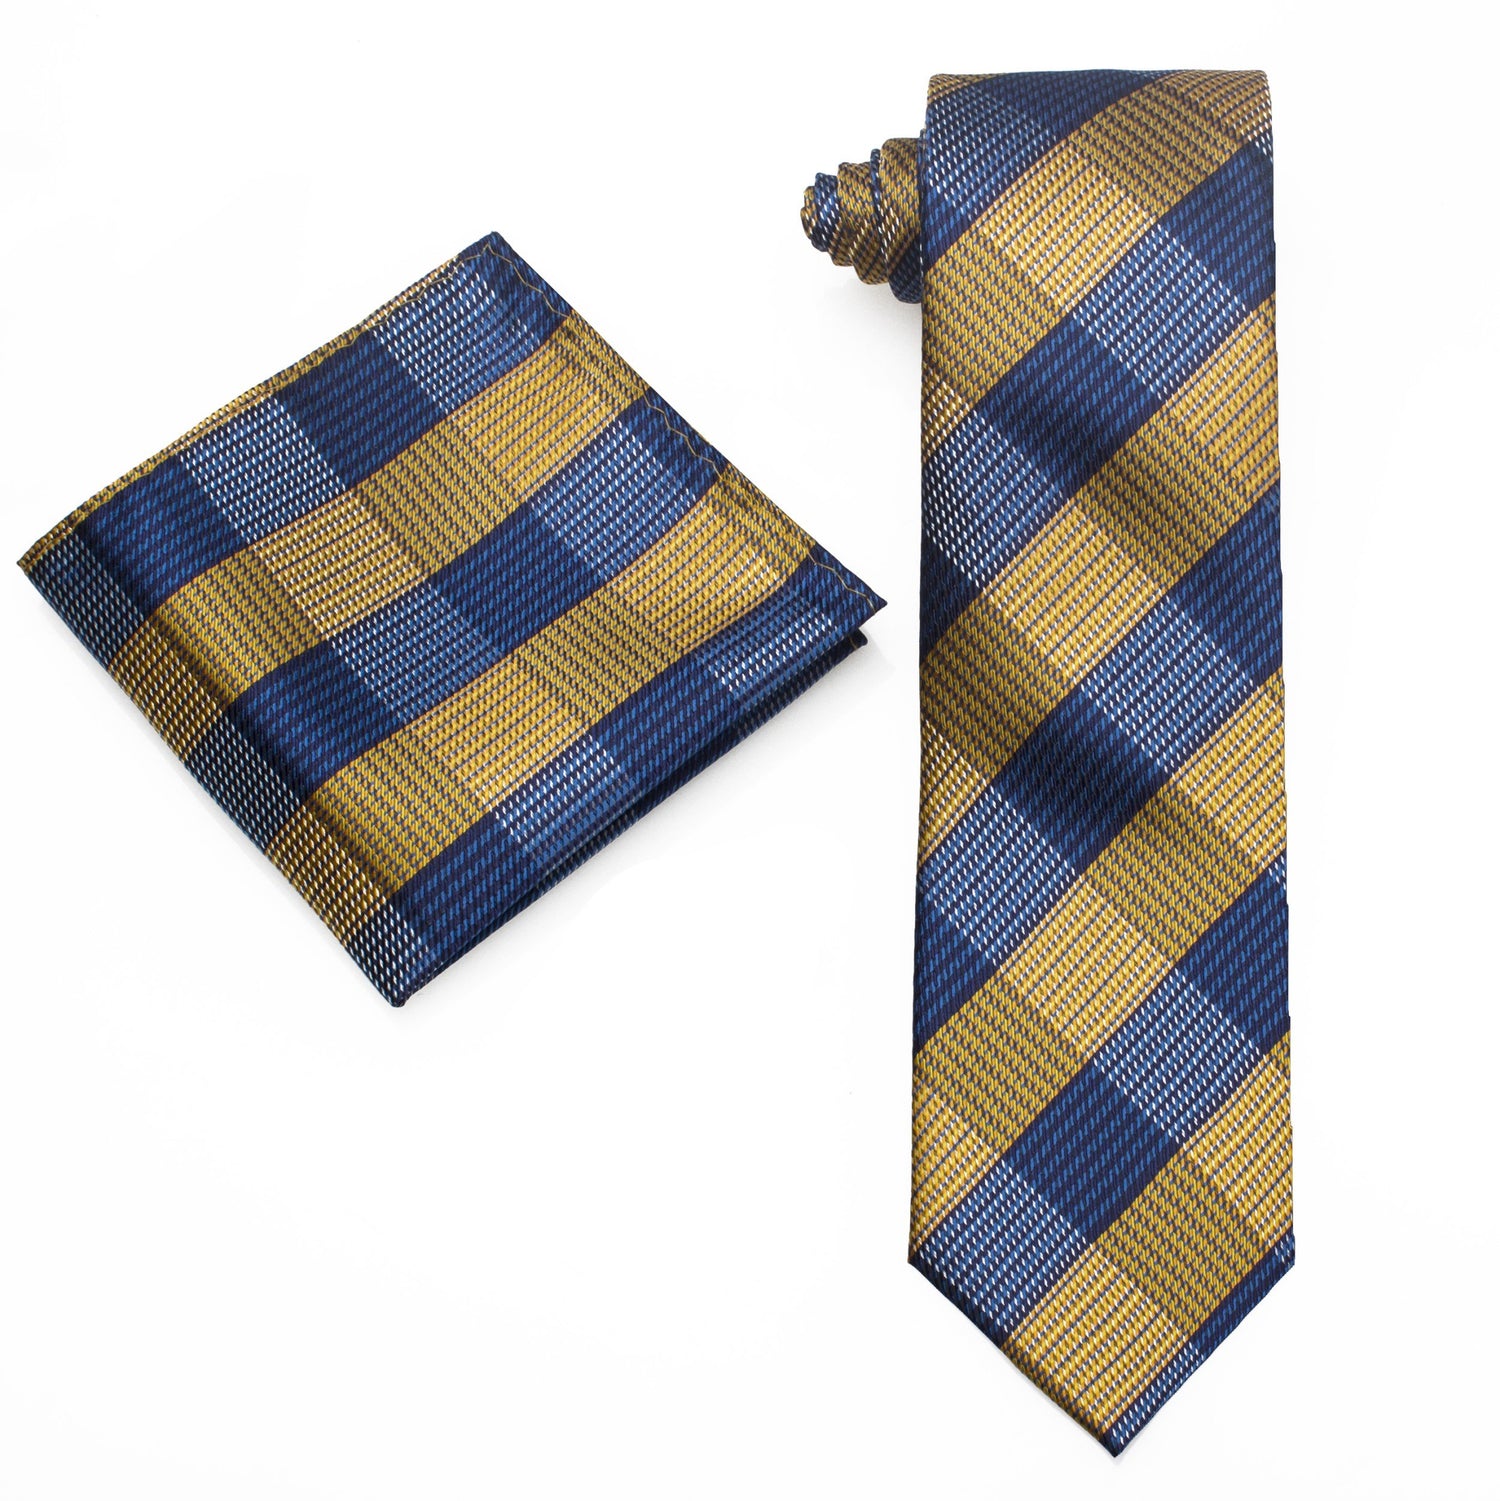 Alt View: Yellow and Blue Plaid Tie and Pocket Square